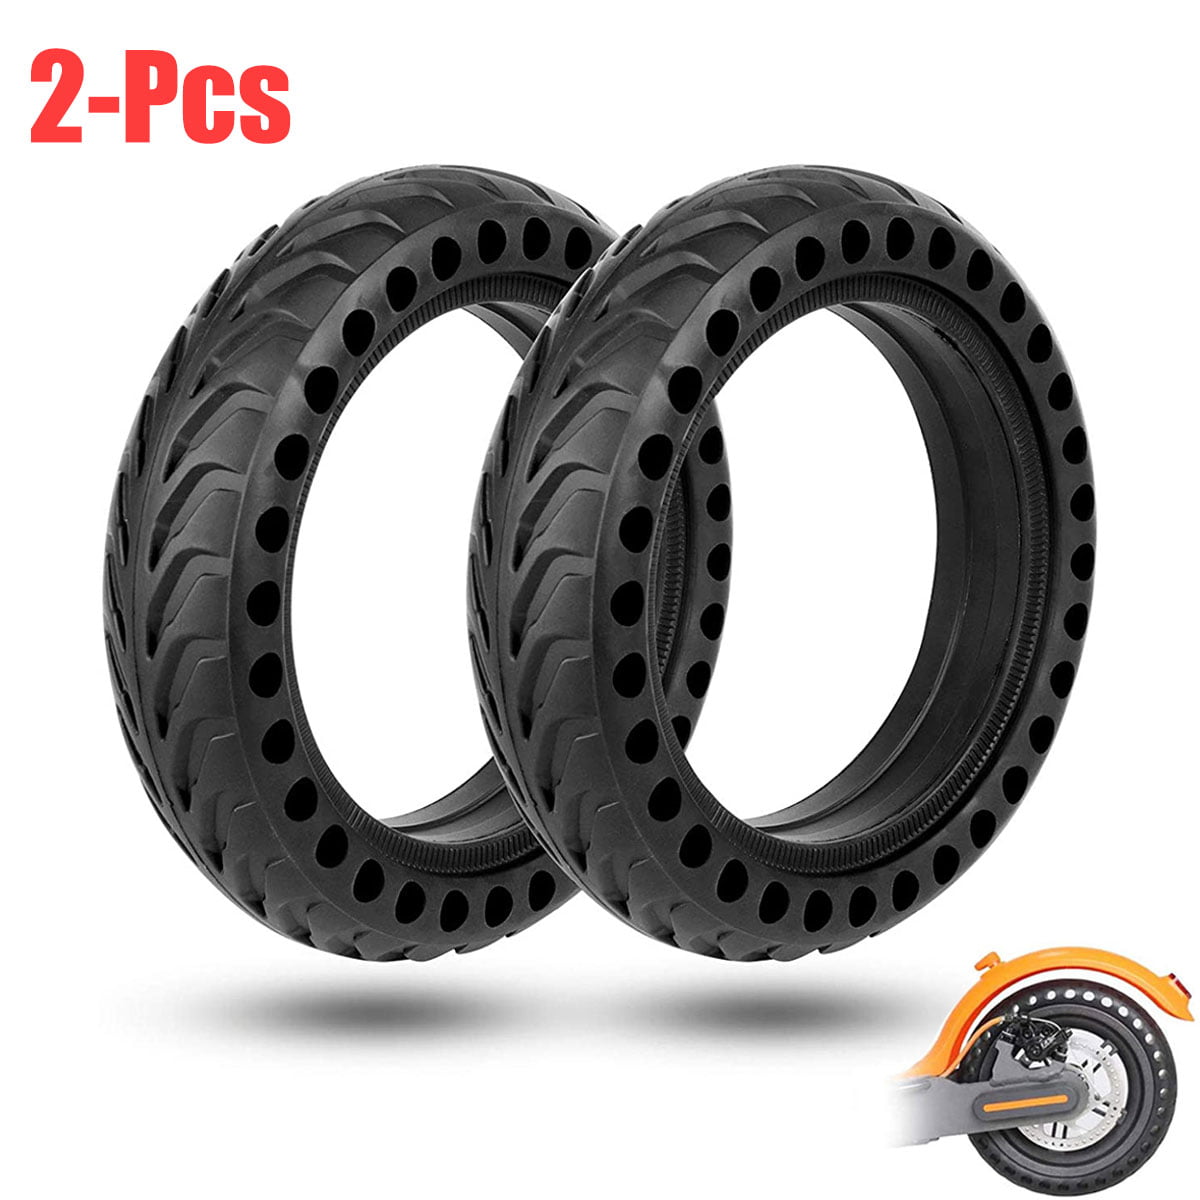 Excellent Shock Performance Solid Tires Wheel Explosion-Proof Tire Replace for Xiaomi Mijia M365 Electric Scooter Nti-Slip Surface Bouanq Electric Scooter Tires 